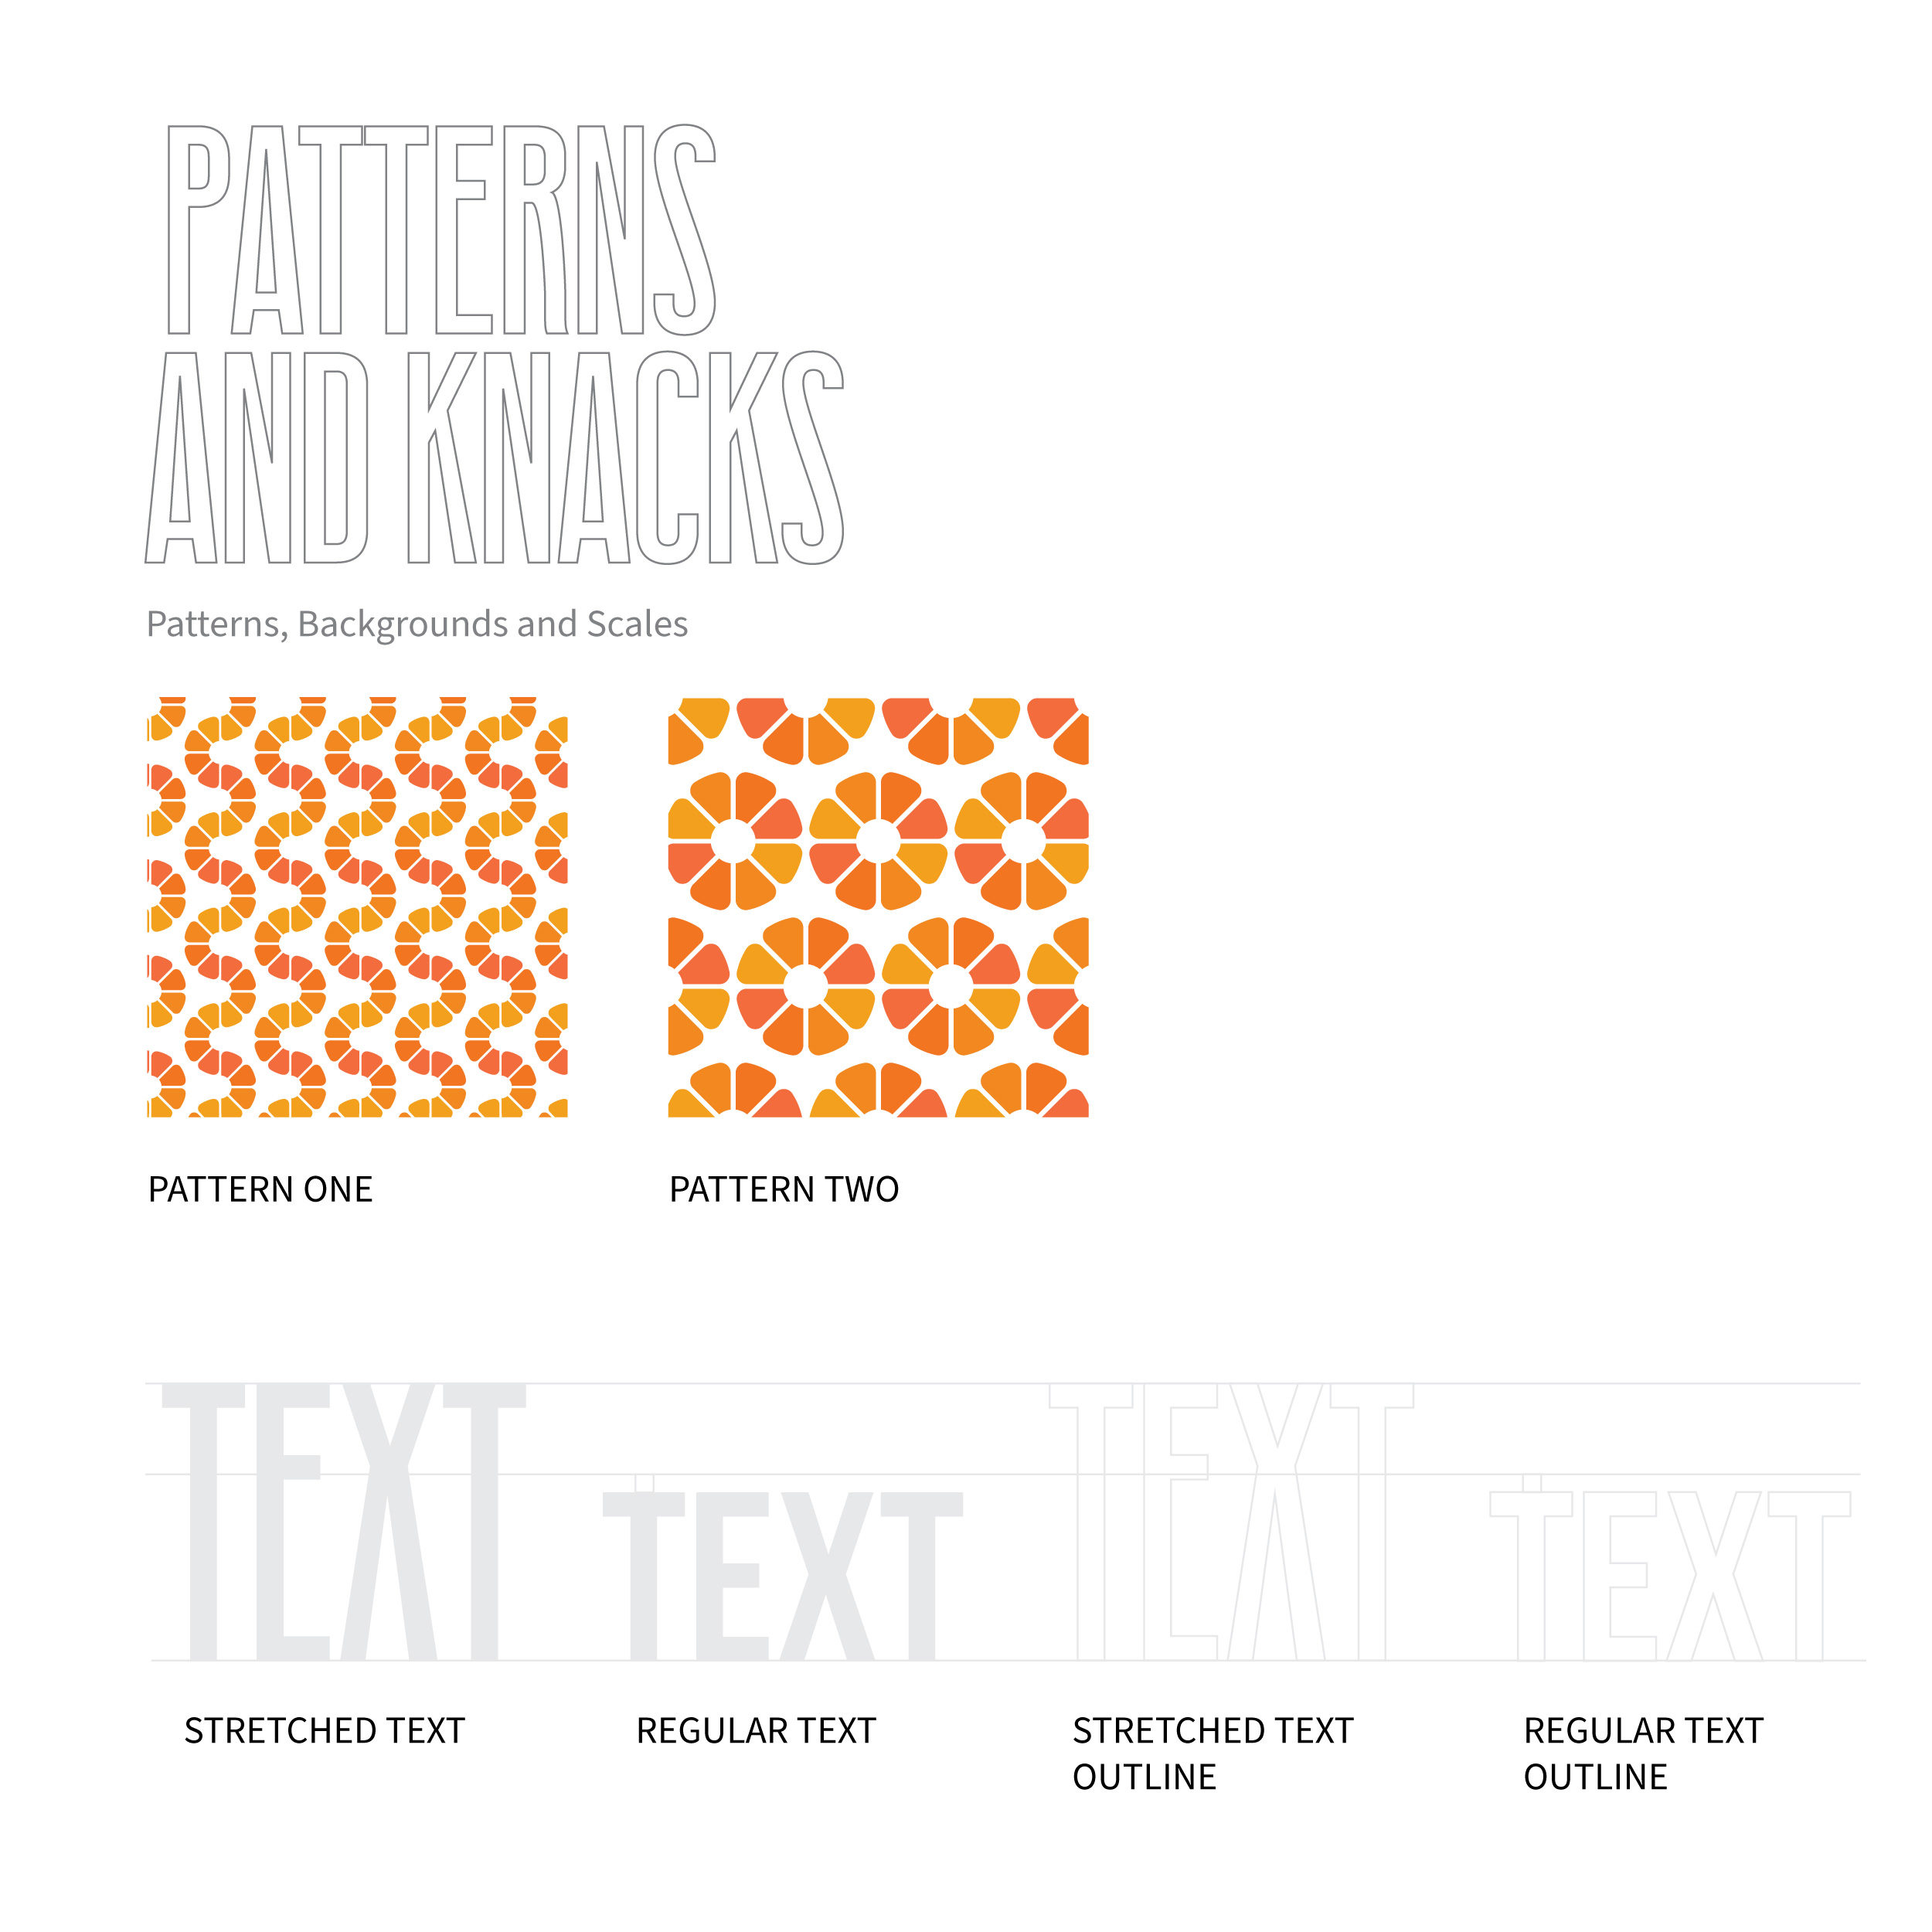 Squeezed patterns style guide